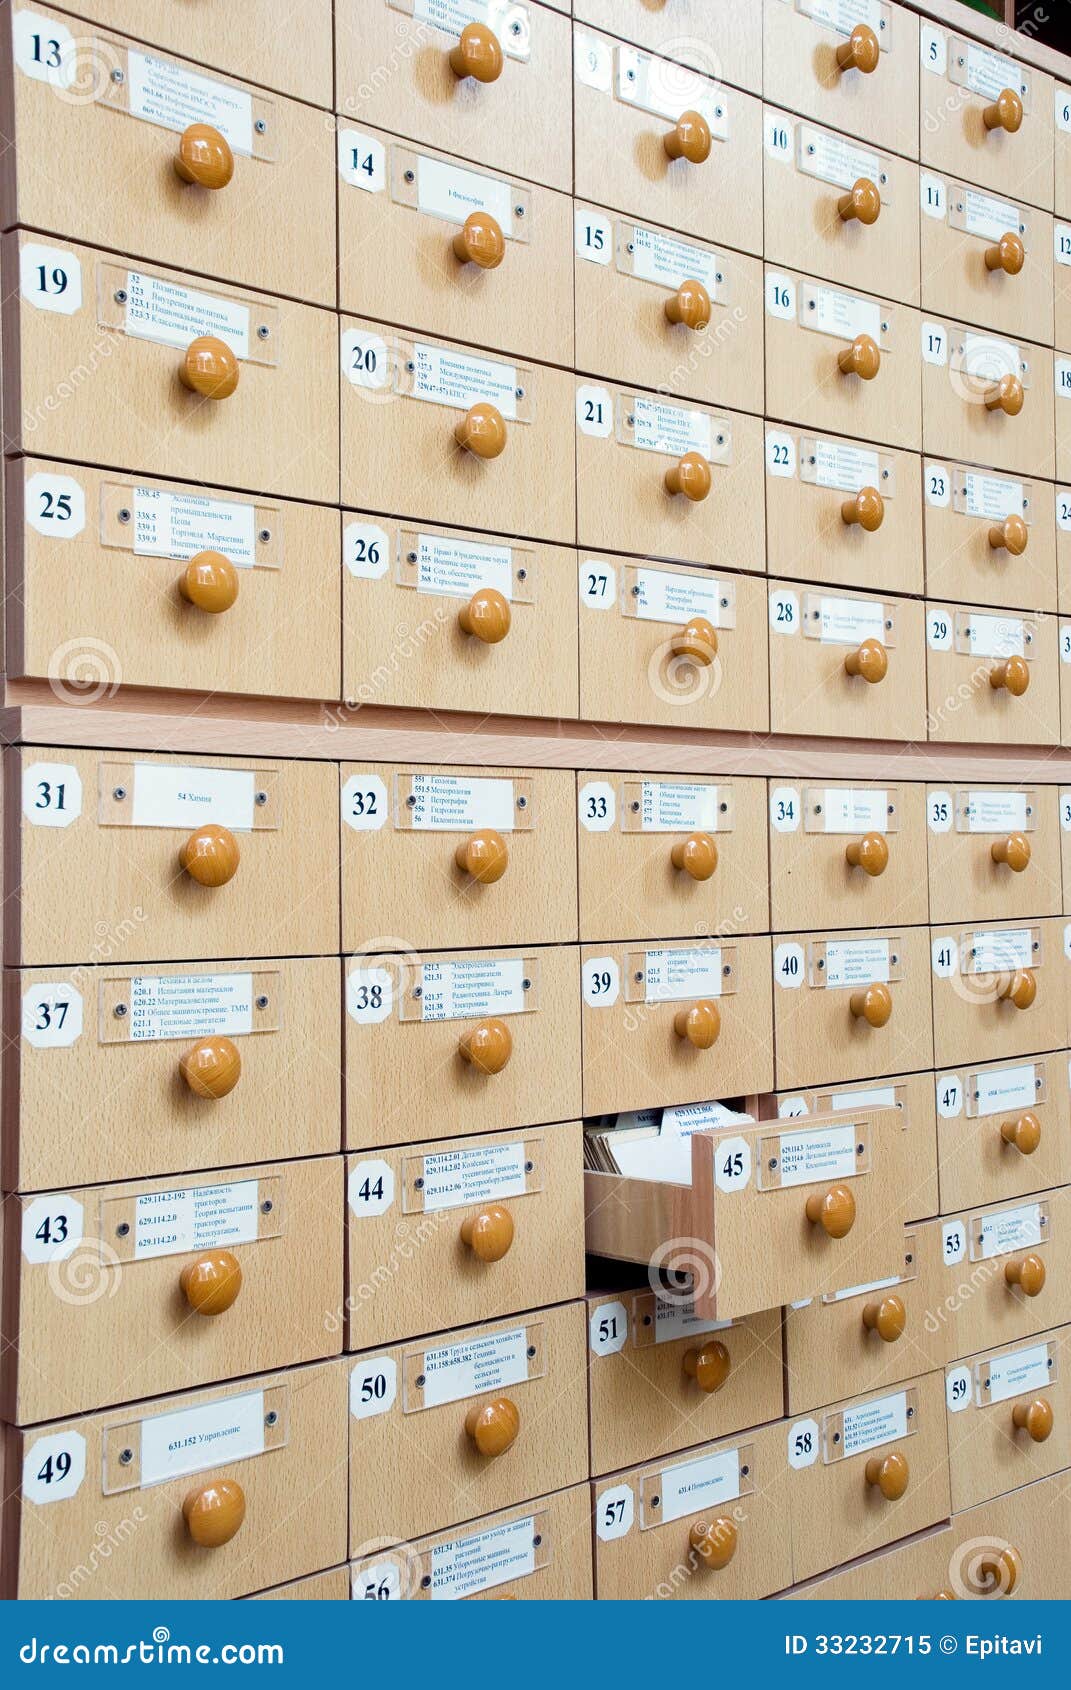 Library Card Catalog Stock Image Image Of Order Card 33232715